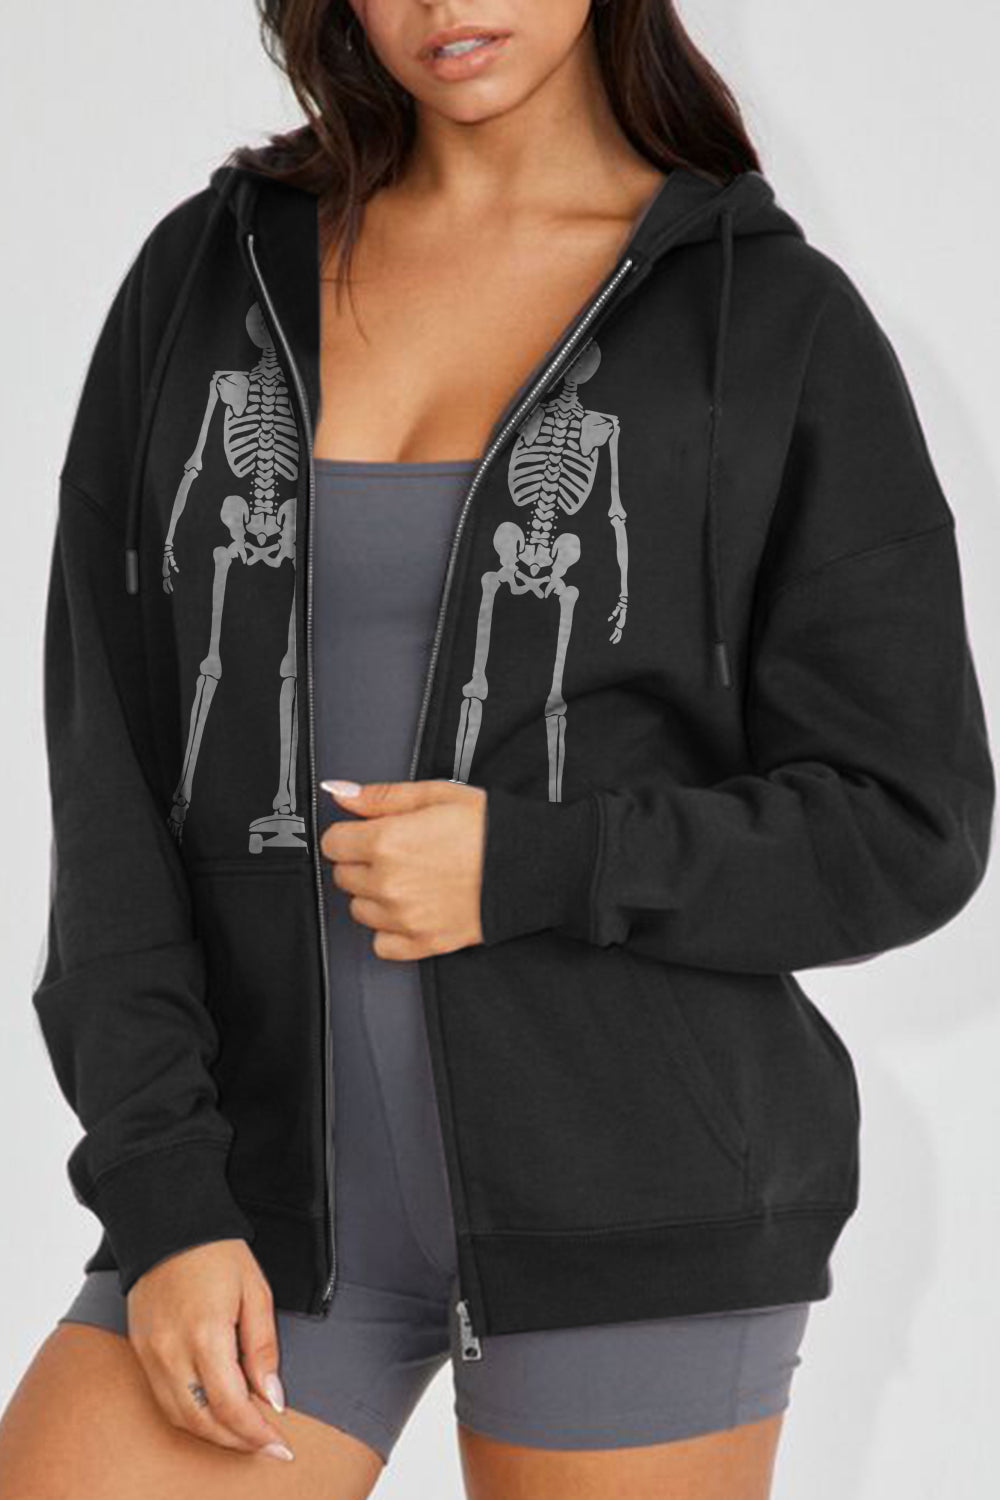 Full Size Skeleton Graphic Hoodie - Women’s Clothing & Accessories - Shirts & Tops - 7 - 2024